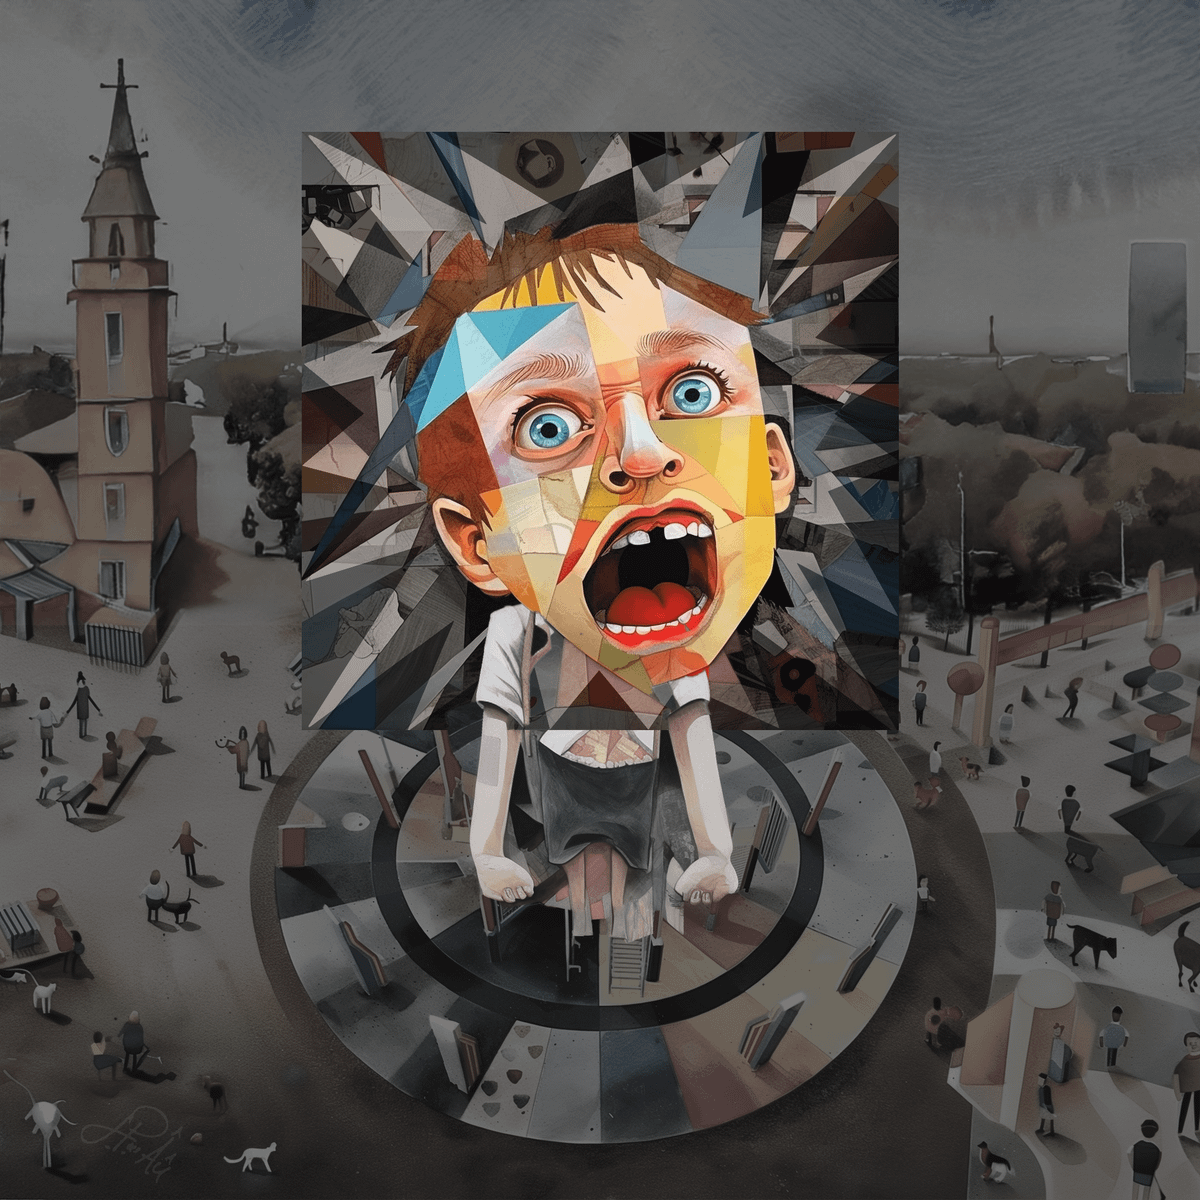 "Calm Down," digital tableau by Johnny Profane Âû. Closeup of a young boy's face during a meltdown. He wears a birthday hat and is standing on a park merry-go-round. In the background a peaceful scene of people walking dogs in a village park surrounded by trees. In a cubist collage style with dark tones an vibrant colors. Digital tools used include AI.